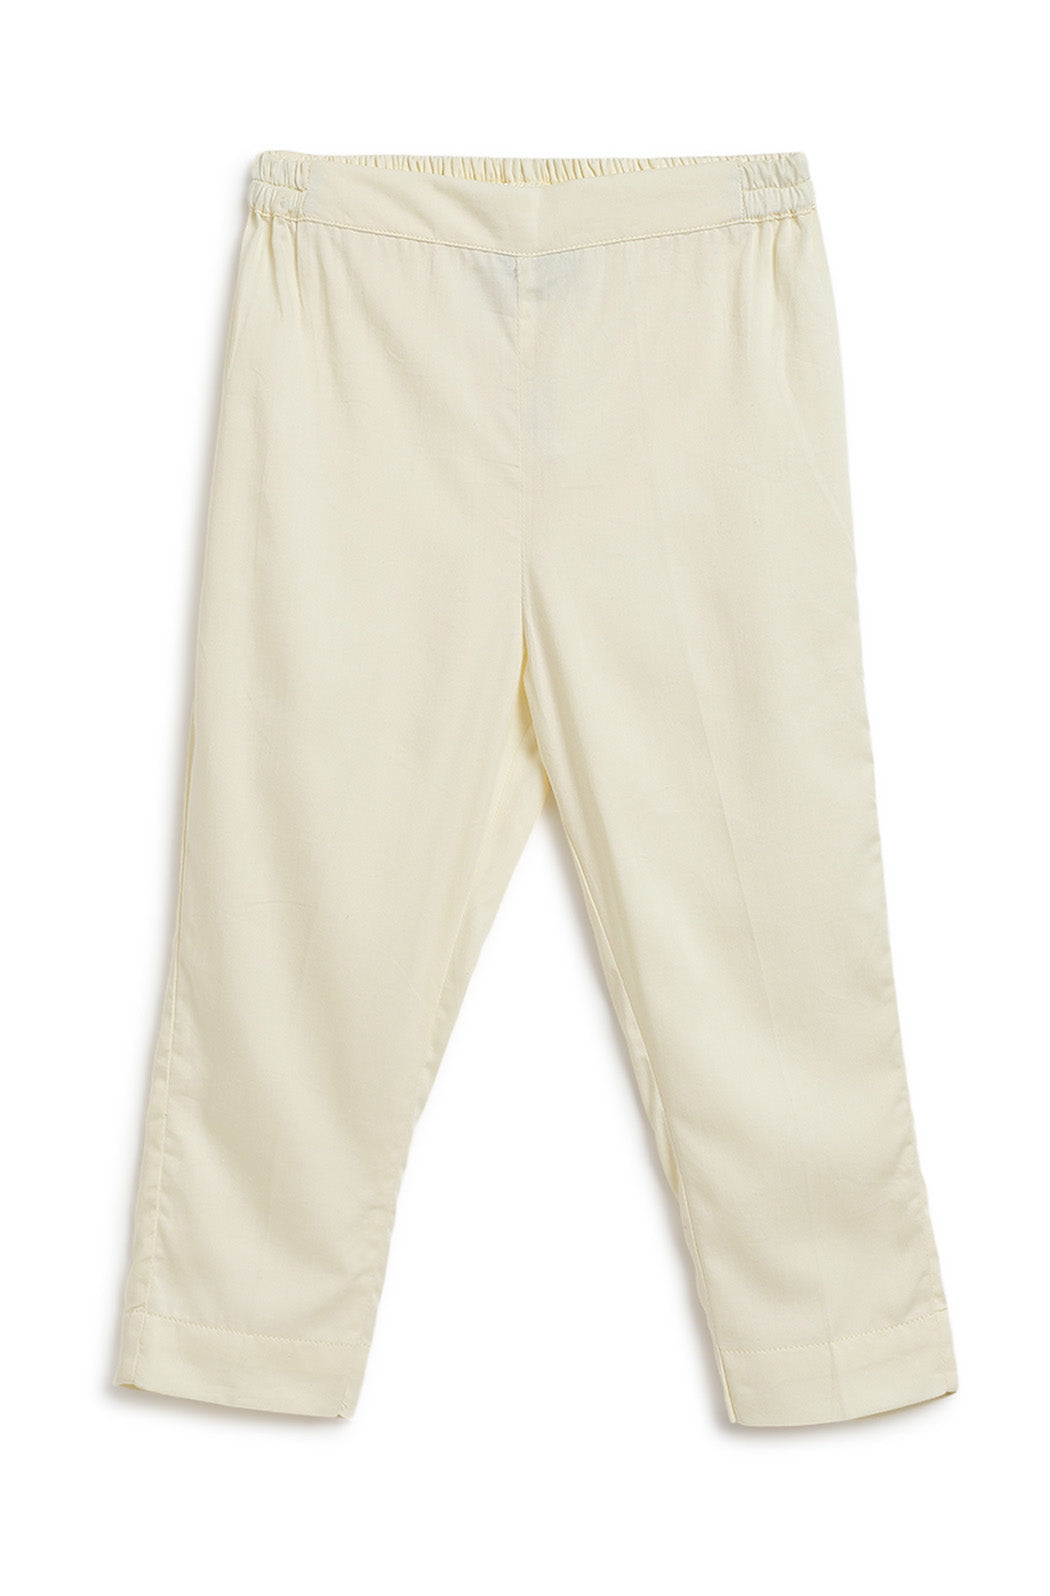 Buy Beige and Cream Combo of 2 Four Pocket Cargo Pants Cotton for Best  Price, Reviews, Free Shipping